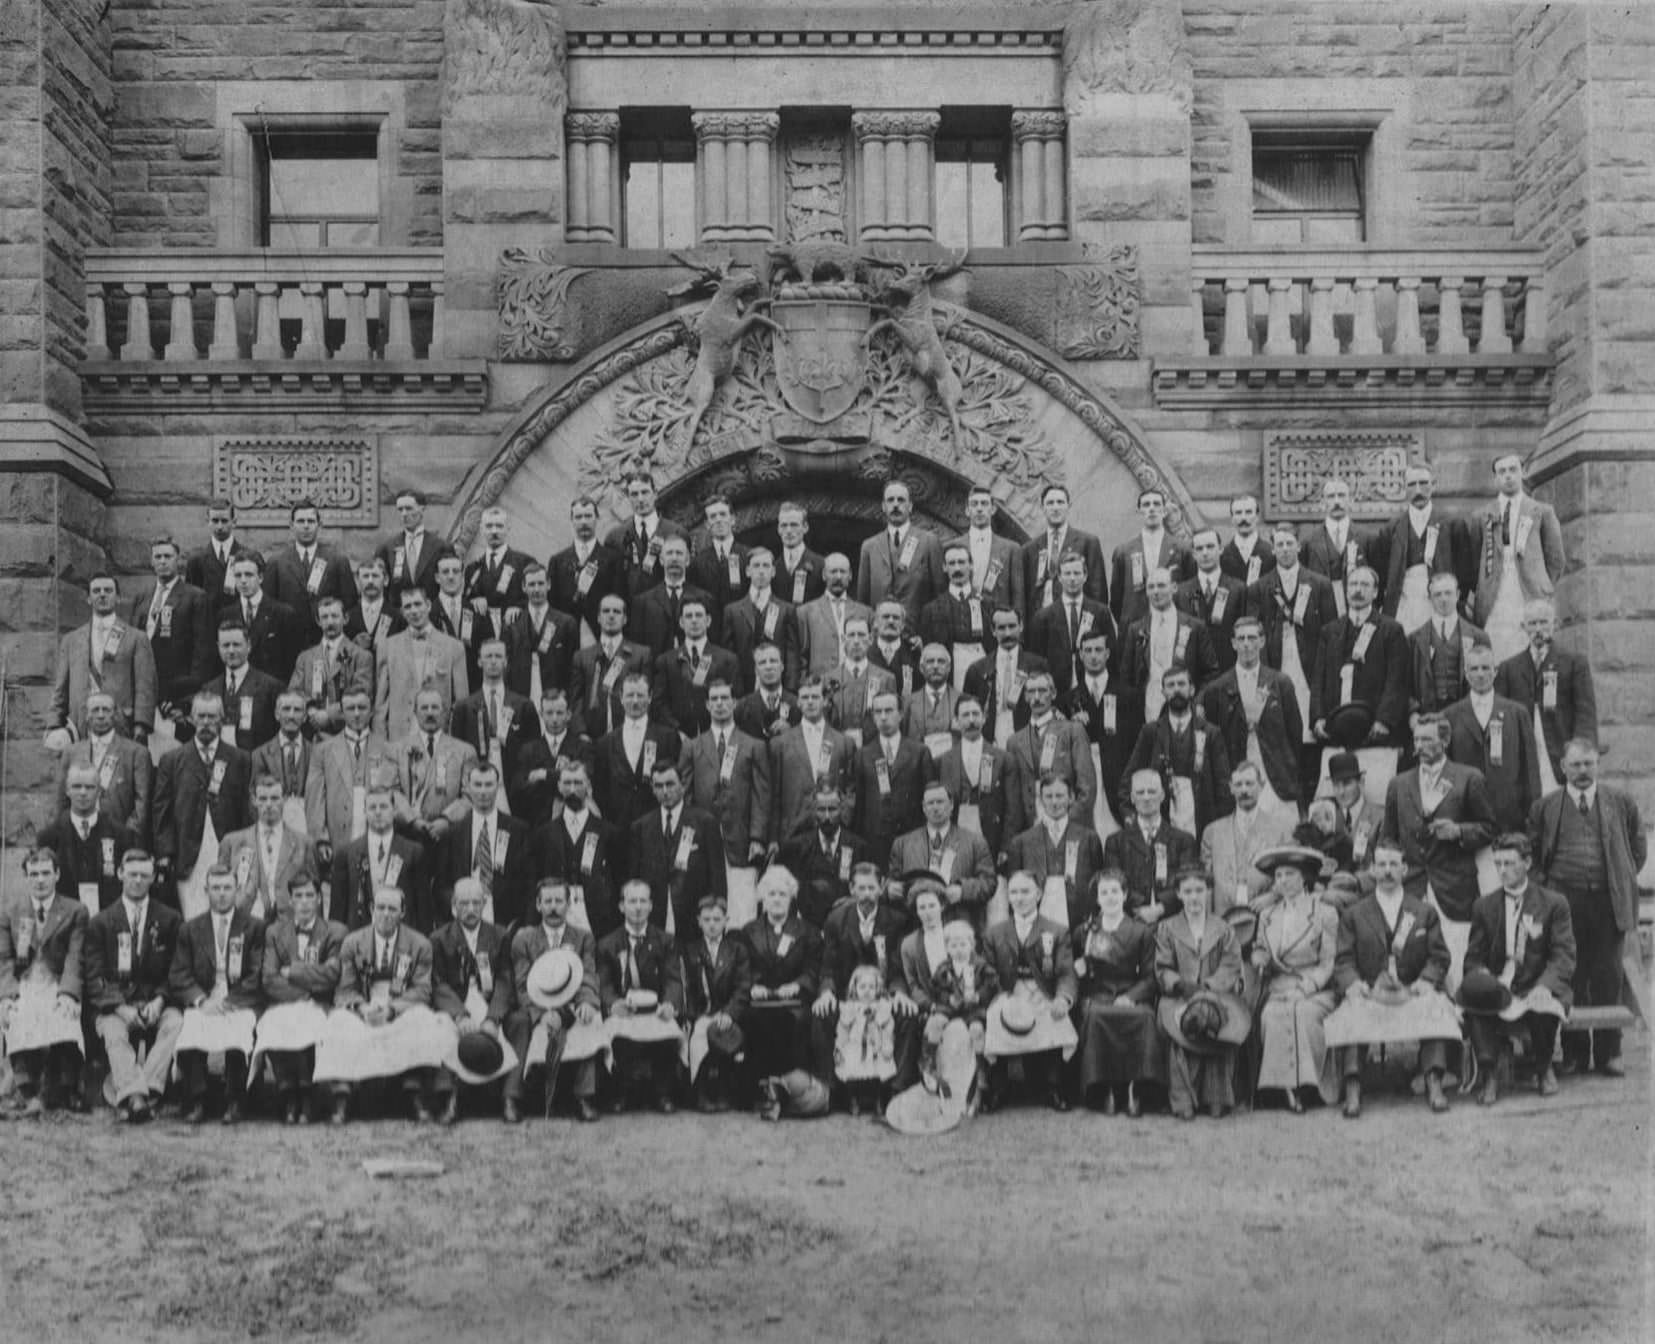 Stonecutters commemorative photo of those involved in creating the intricate carvings on the north wing of the Ontario Legislative Building in Queens Park, Toronto, 1913